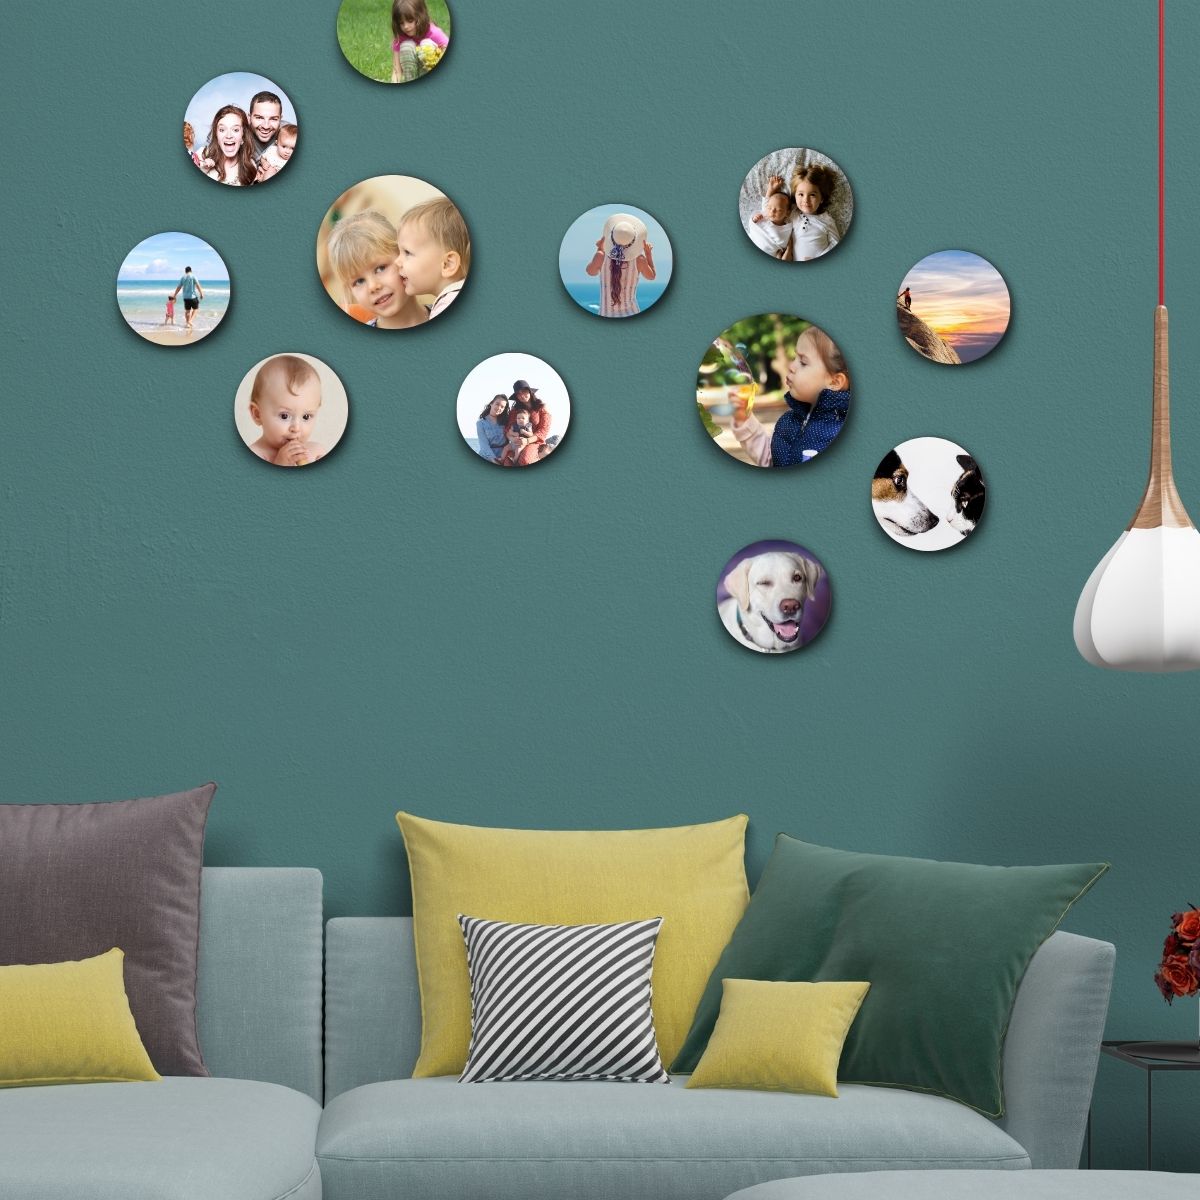  personalized Mix of 12 Round Photo Tiles